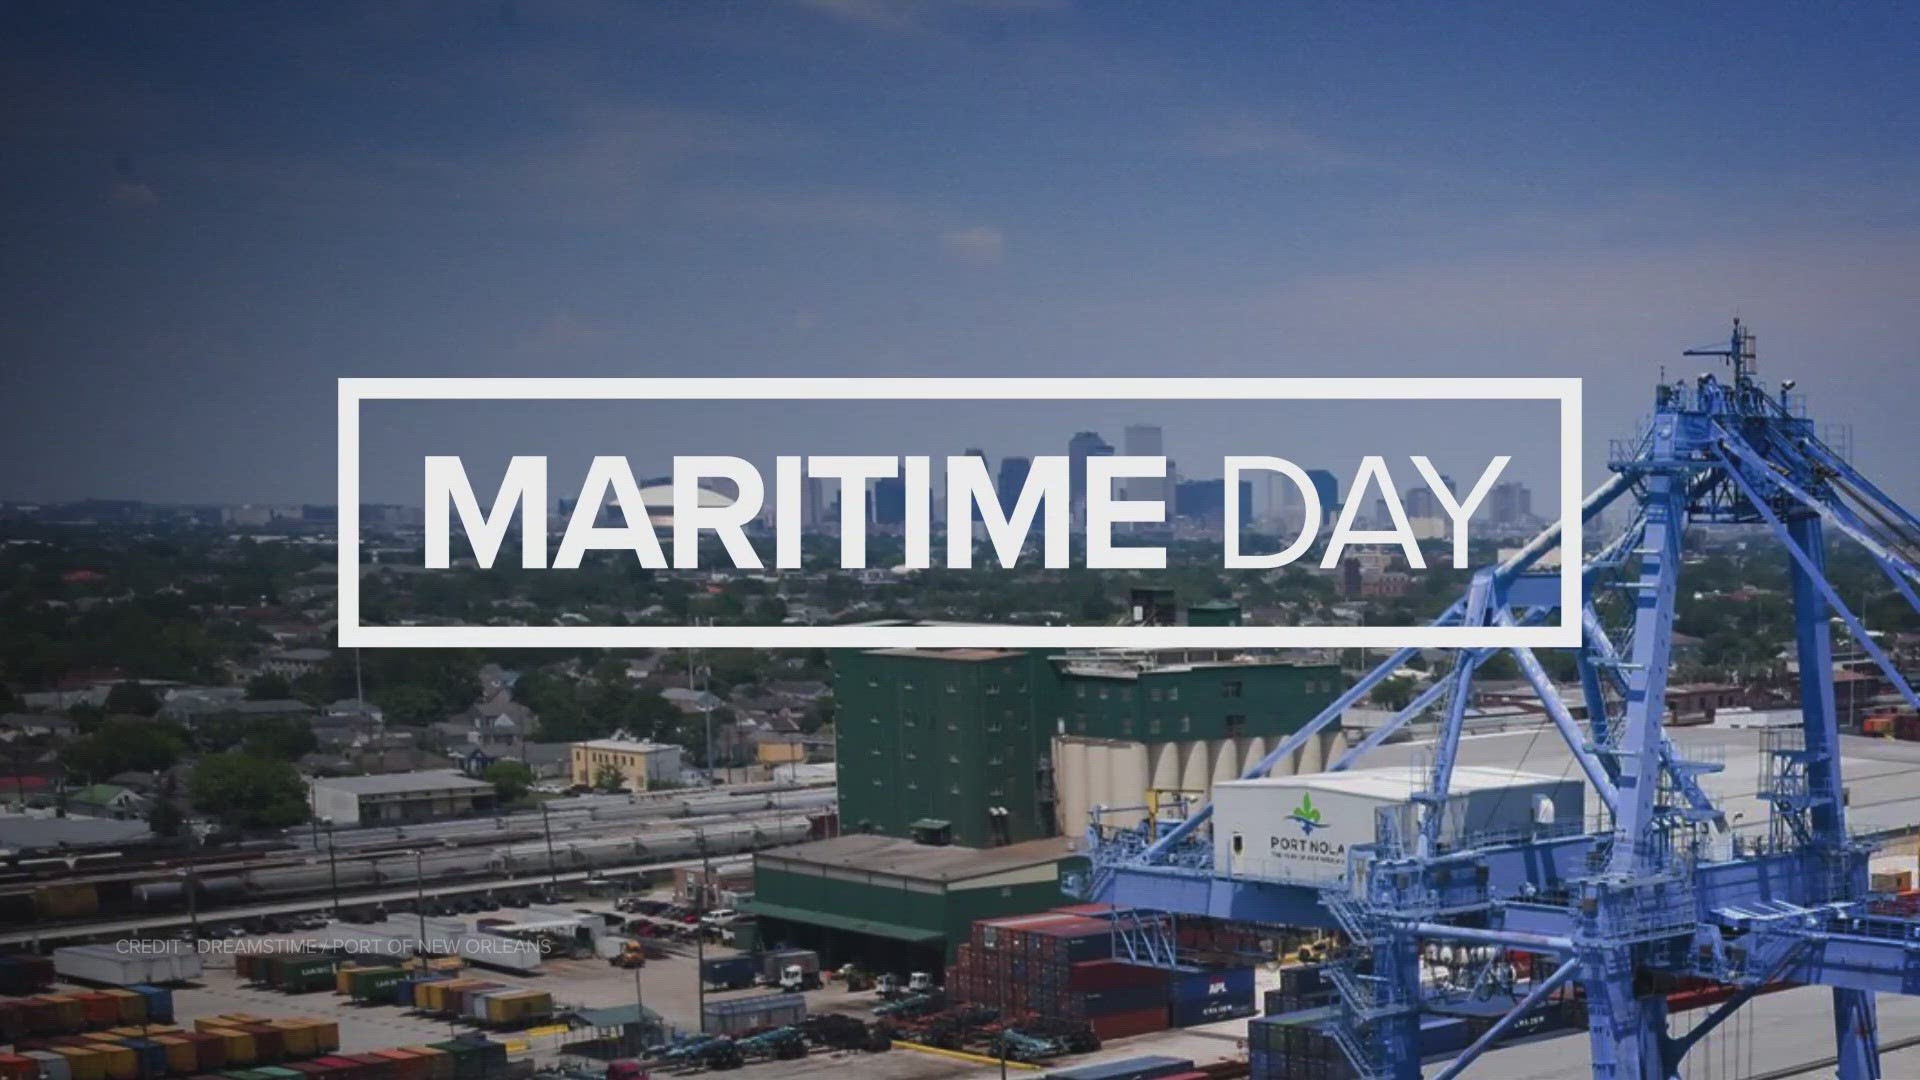 We join Port of New Orleans Chief of Staff Laura Mellem in celebration of National Maritime Day.